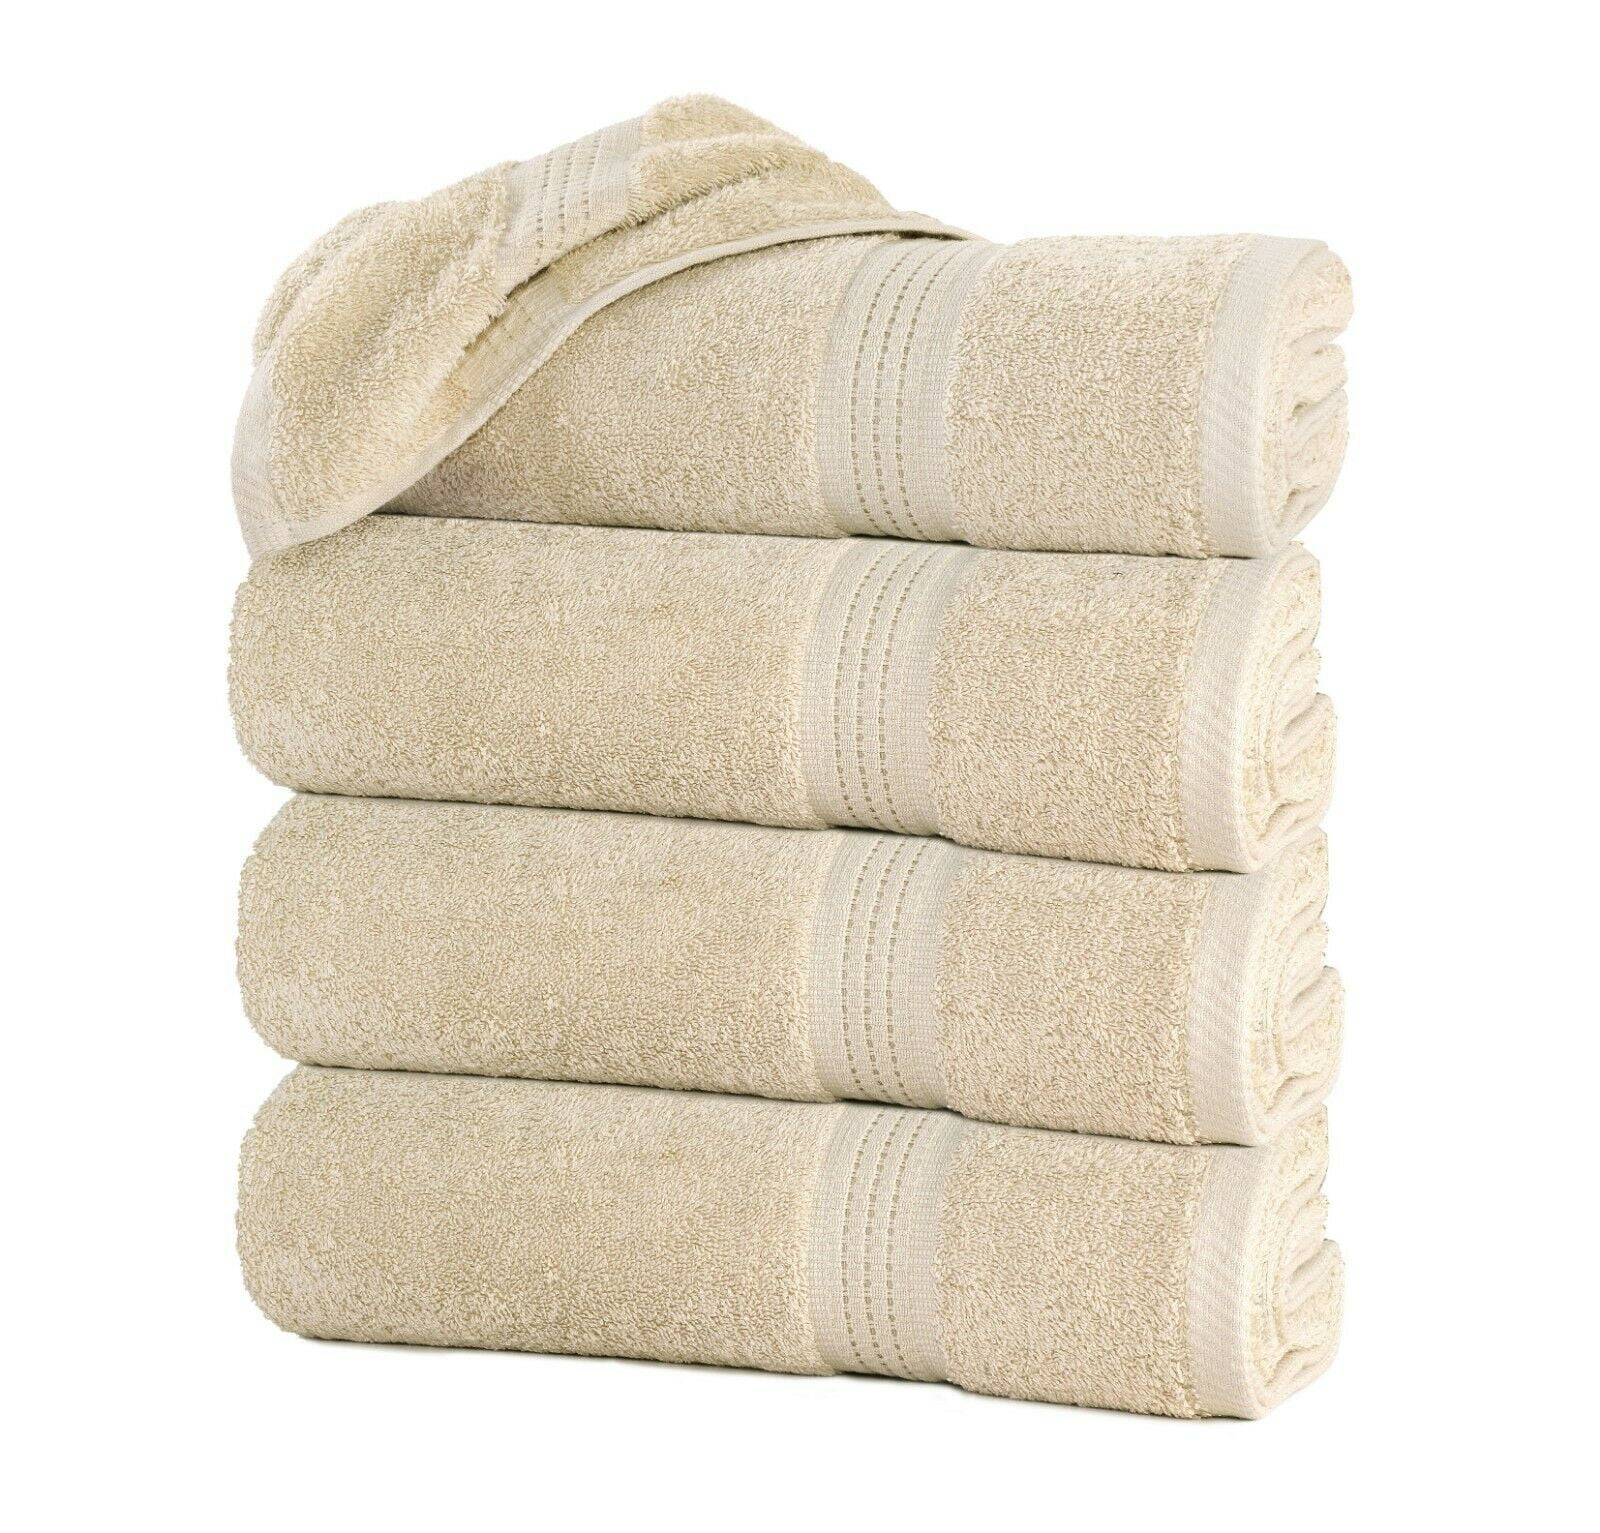 Large Bath Towel Packs Sets Sheets 100% Cotton 27"x55" 500 GSM Highly Absorbent 